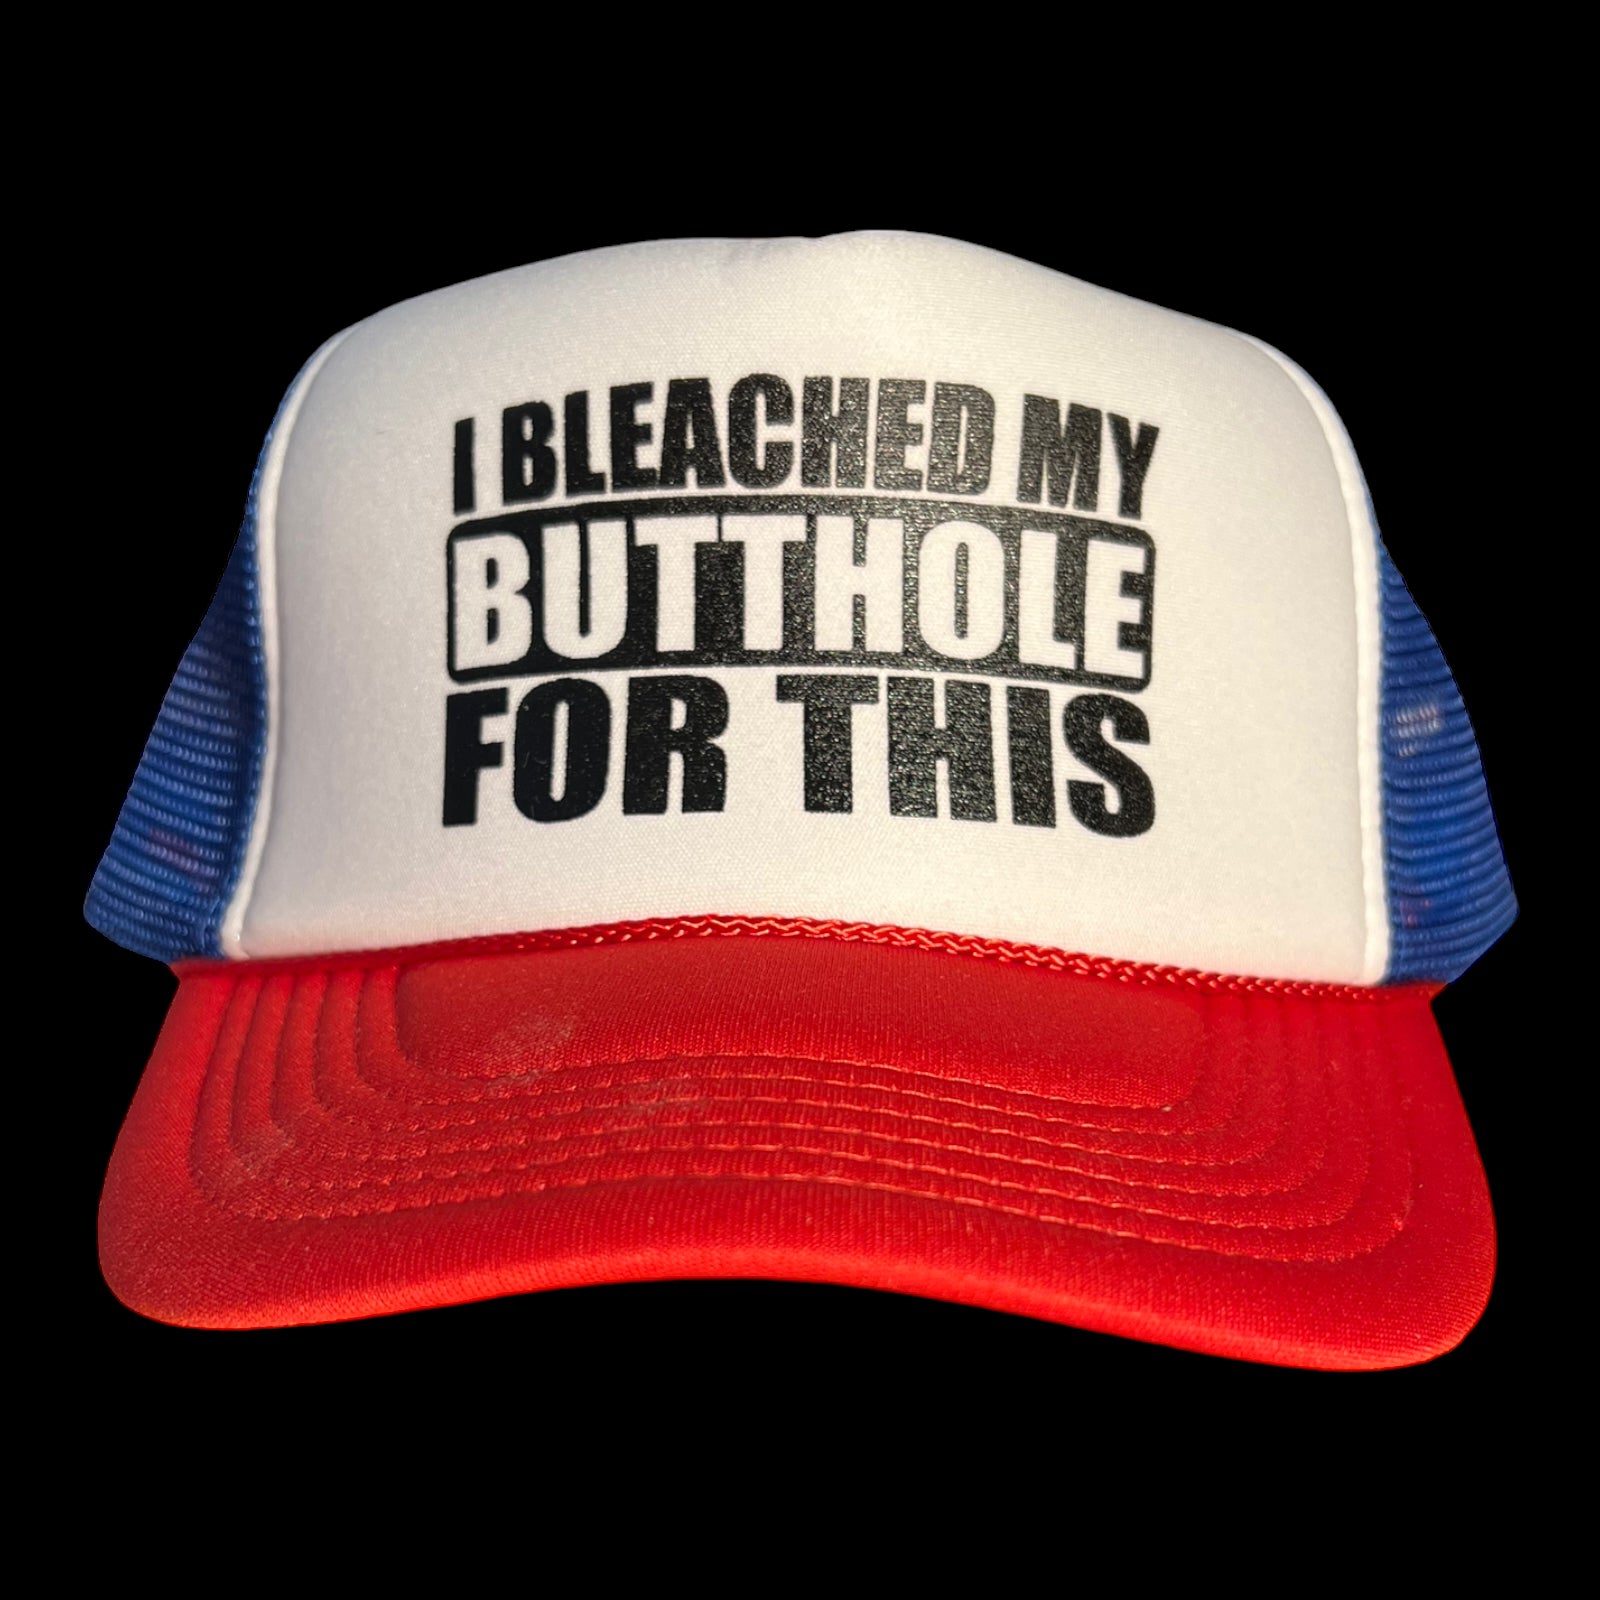 I Bleached My Butthole For This Trucker Hat Funny Trucker Hat Red